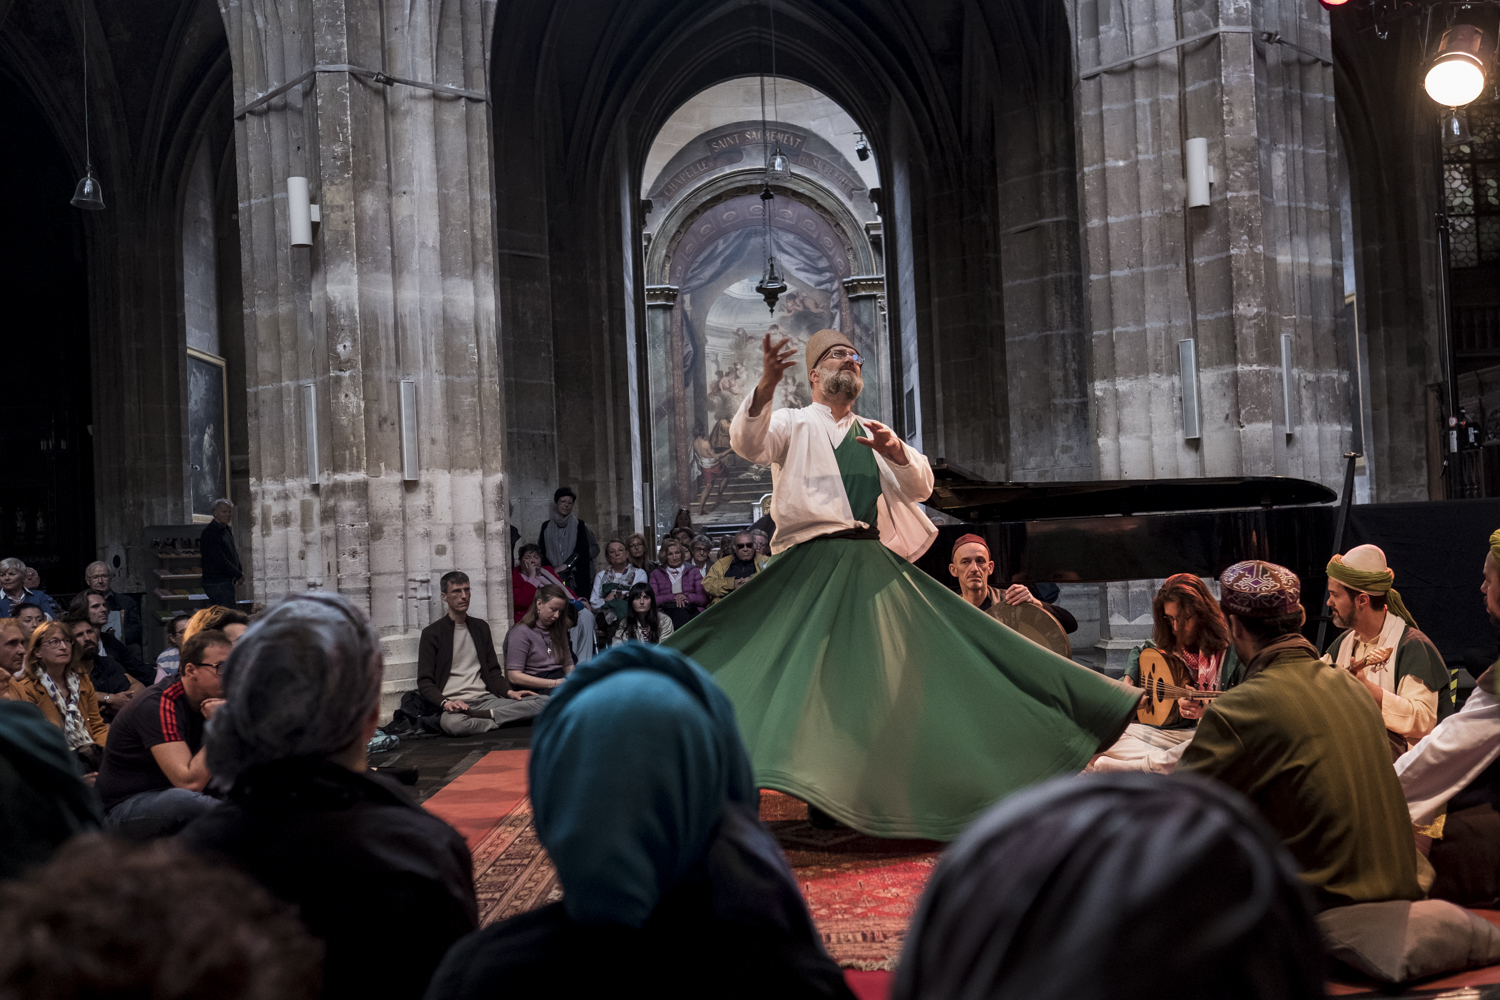 The Dervish Spirit Ensemble performs in front of the audience in Saint Merry on 9 June 2019 (photo: Jan Schmidt-Whitley / Le Pictorium)